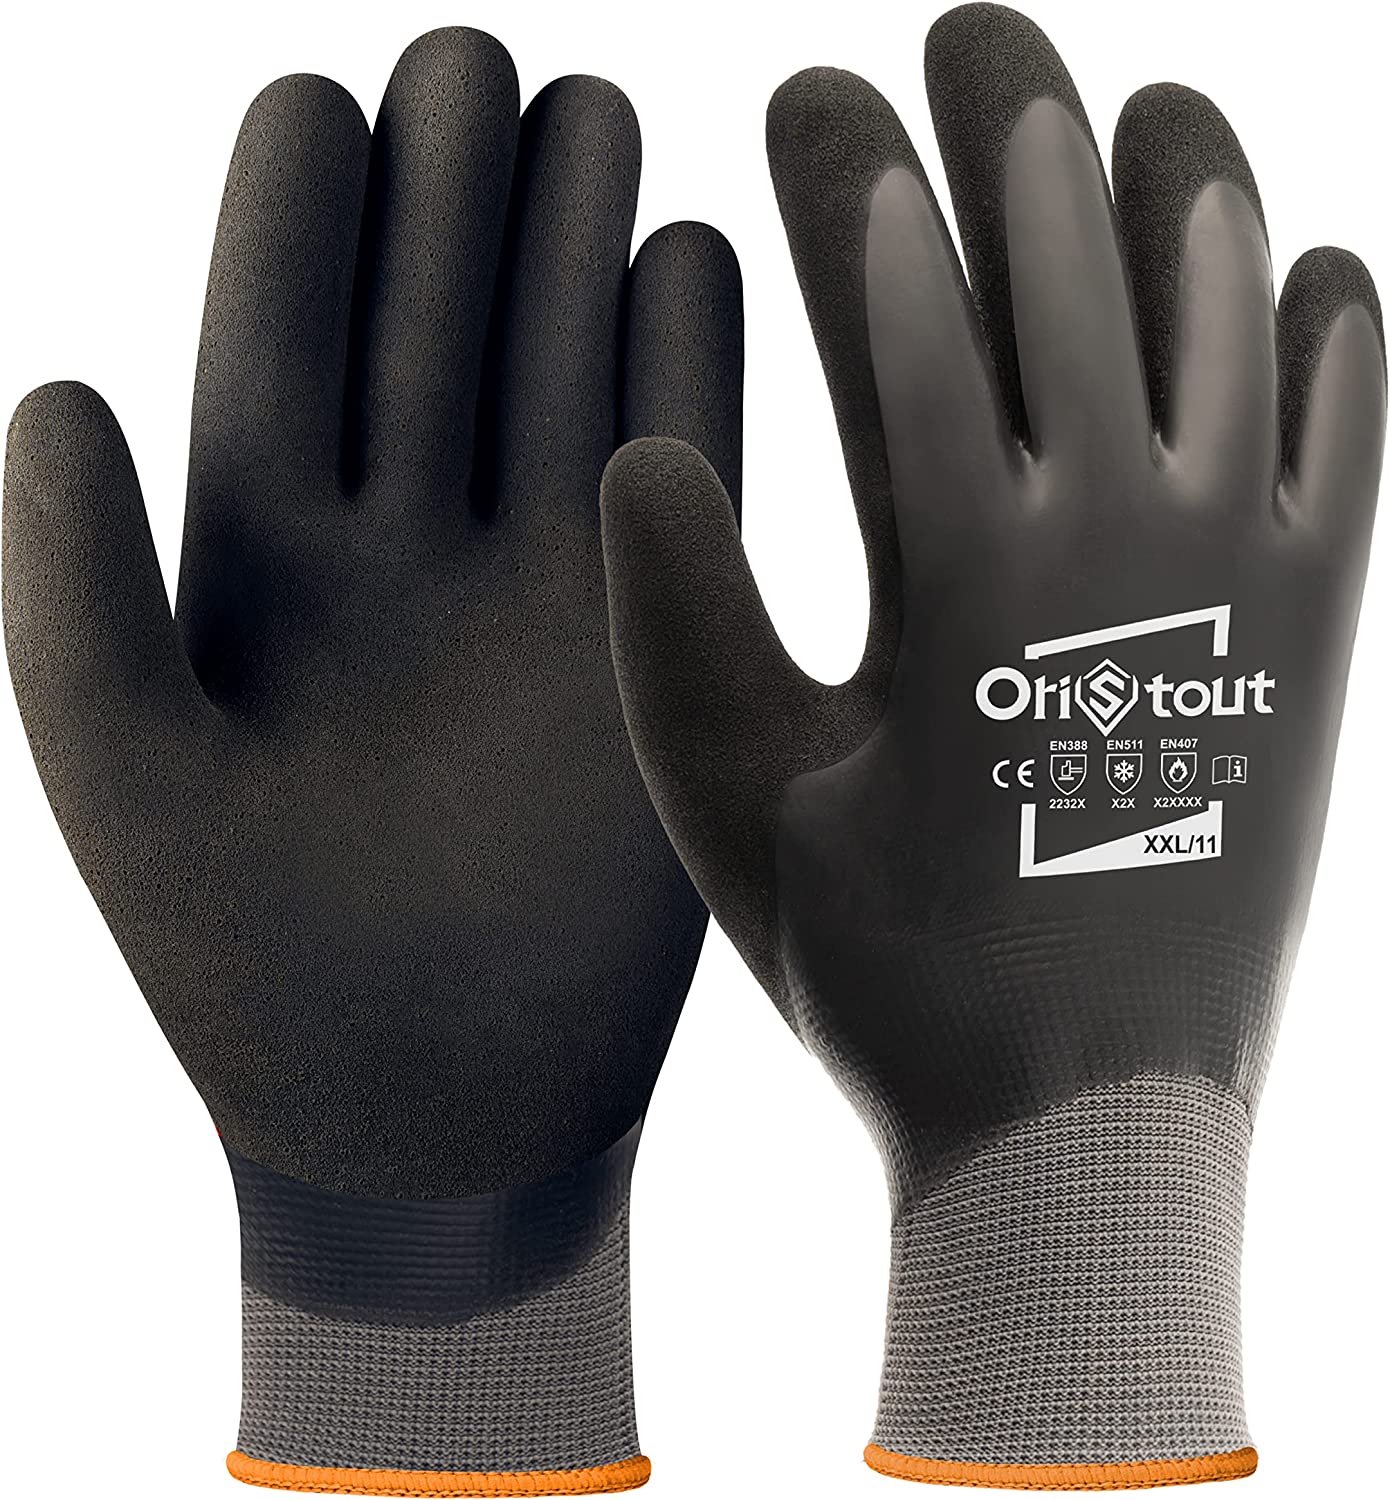 100% Waterproof Gloves for Men and Women, Winter Work Gloves for Cold  Weather, Touchsreen, Thermal Insulated Freezer Gloves